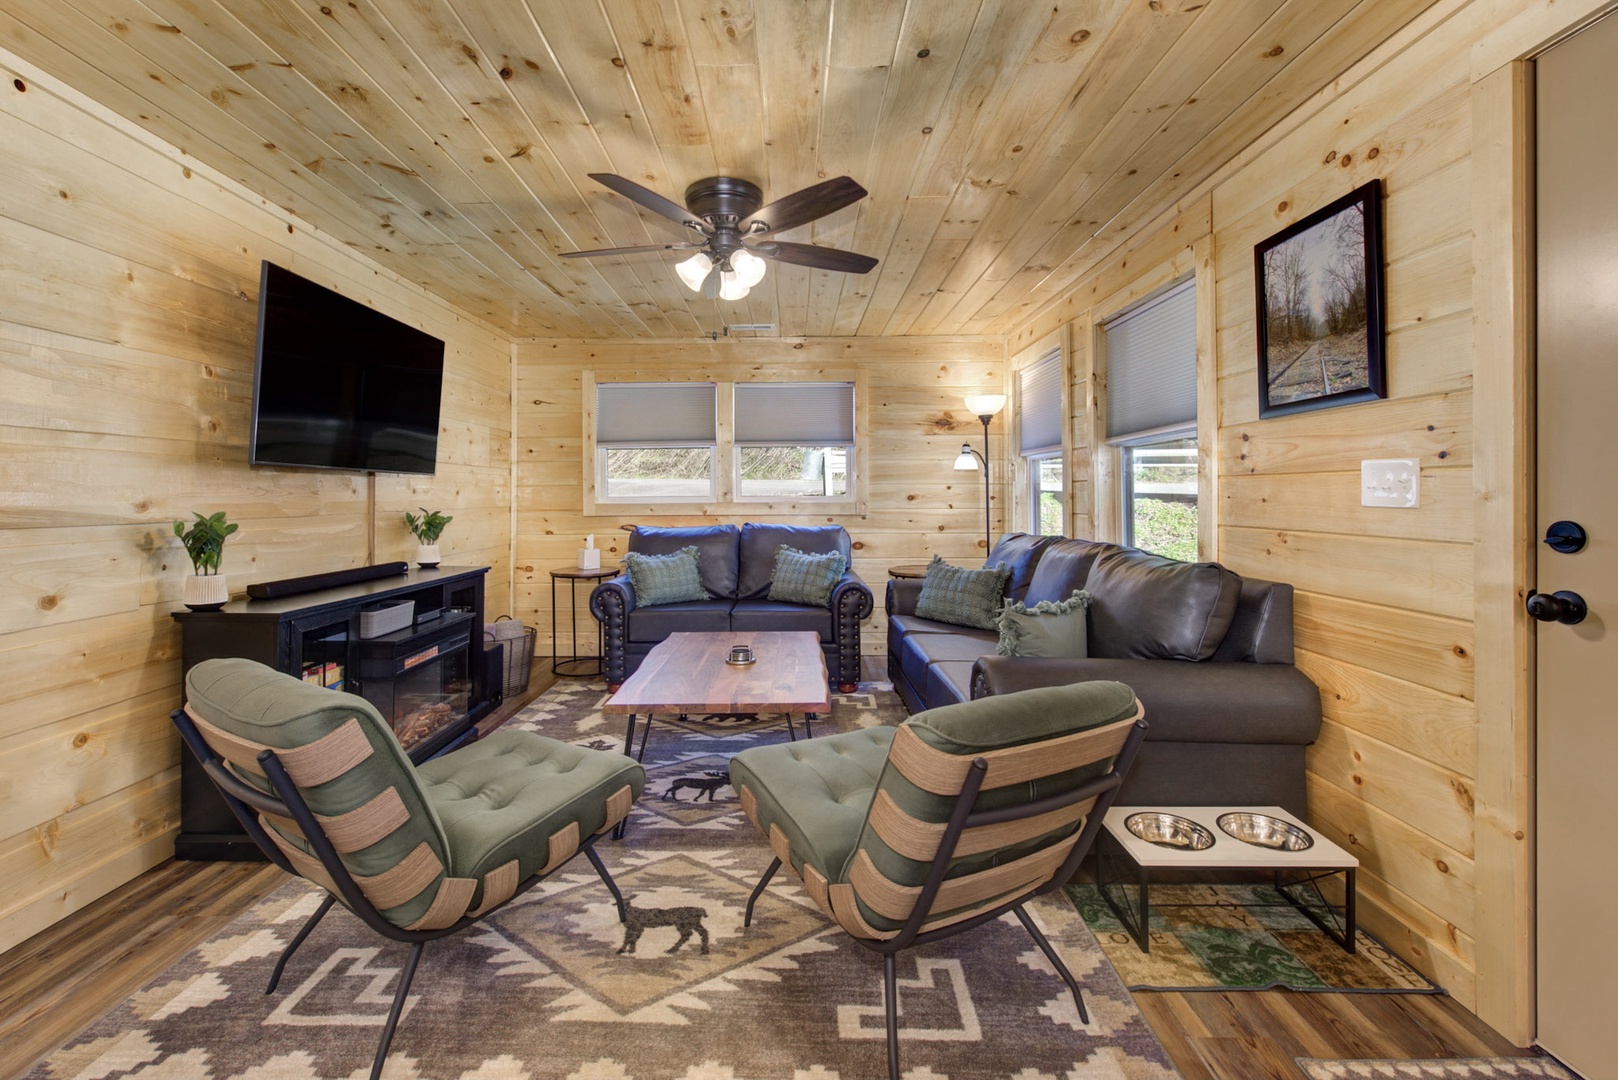 Unwind in comfort with a book or enjoy movie nights in this woodsy retreat